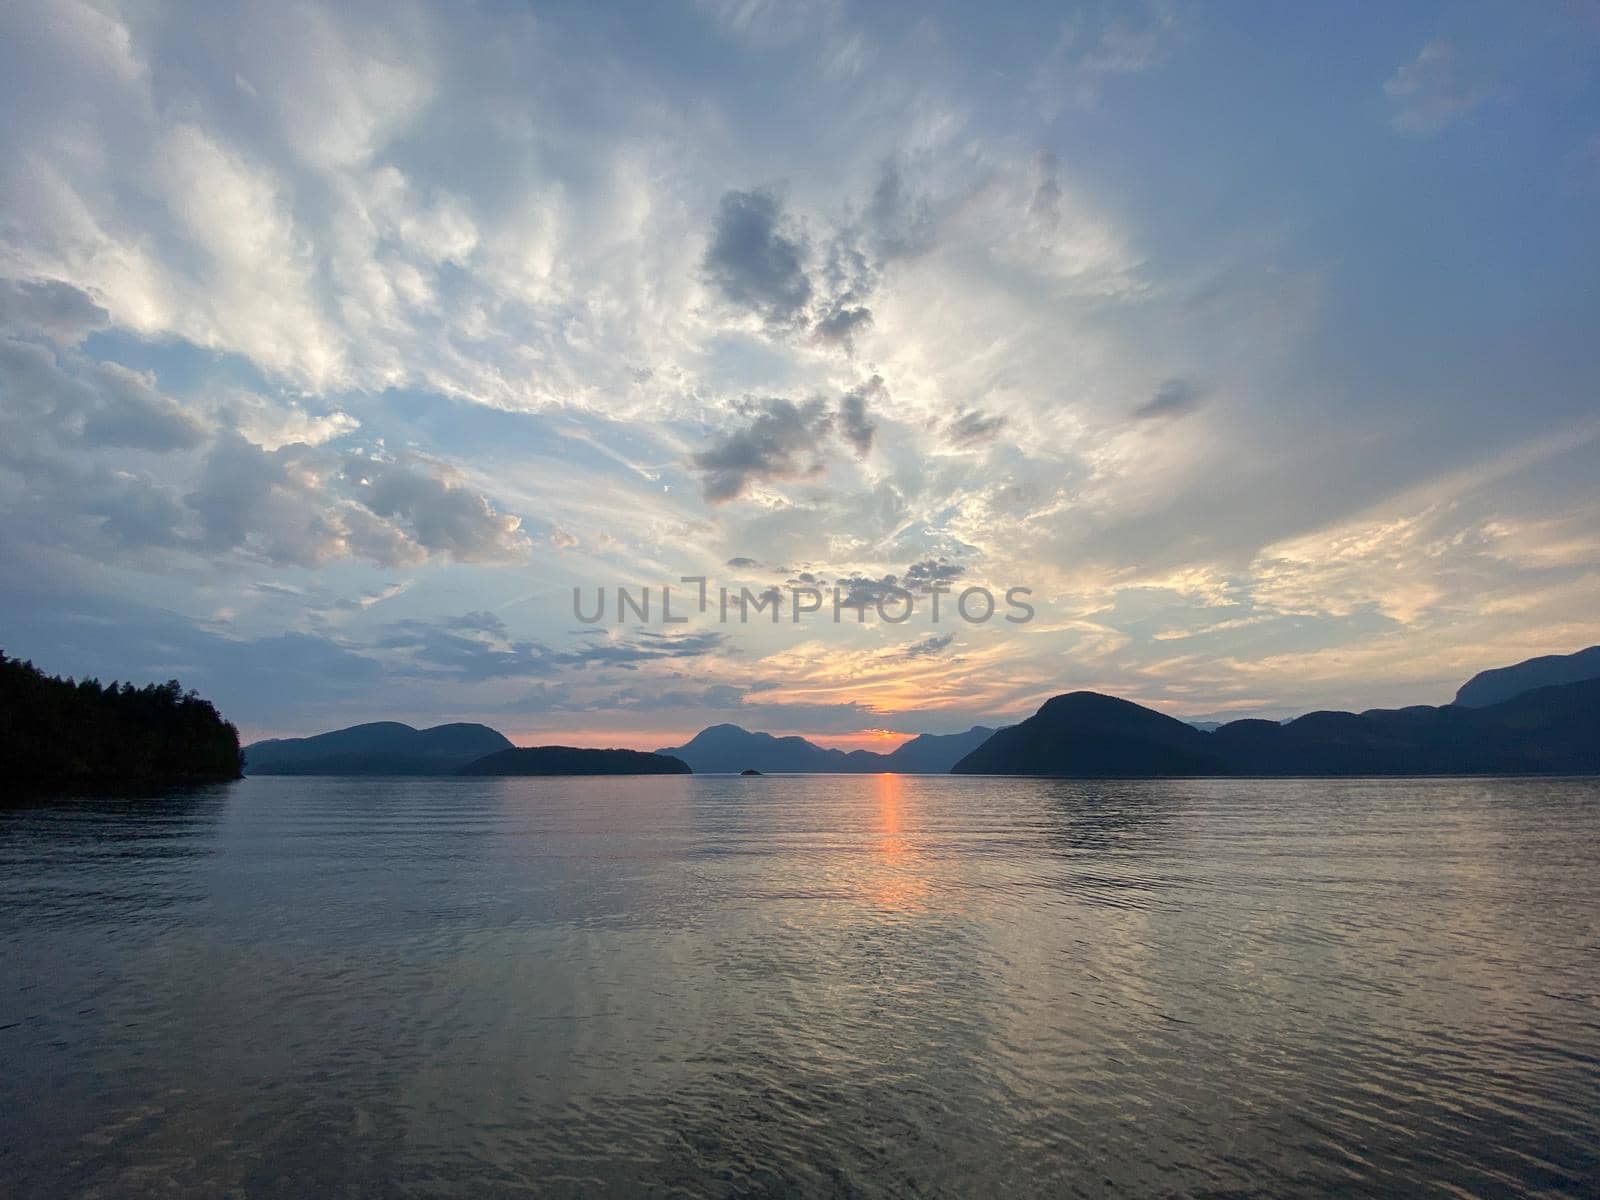 Sunset scene over mountains near Thetis Island with reflection on water by Granchinho